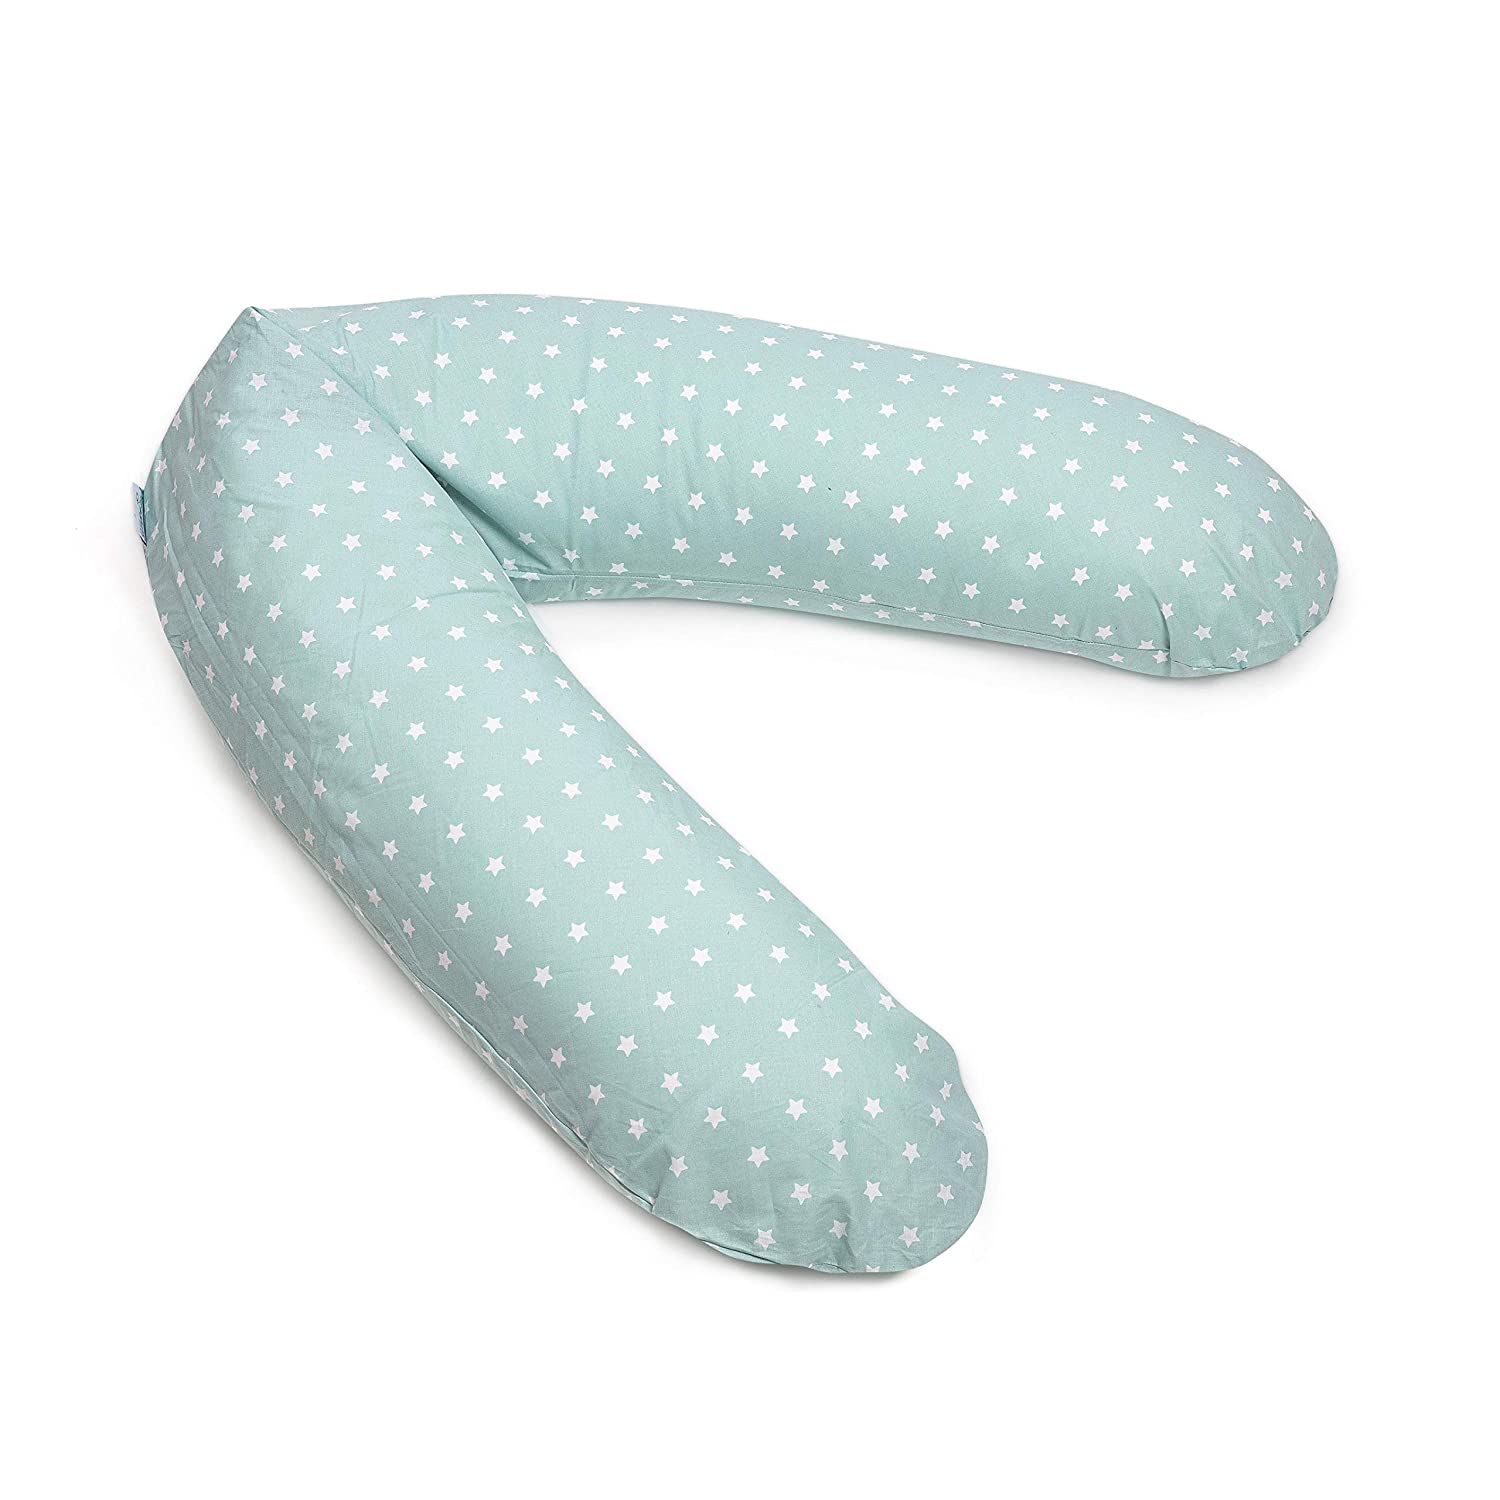 Honey Collection Breastfeeding Pillow, Soft and Cuddly EPS, Microbead Filling, Support Pillow, TÜV Certified, 100% Cotton Pregnancy Pillow 170 cm Stars celadon-green